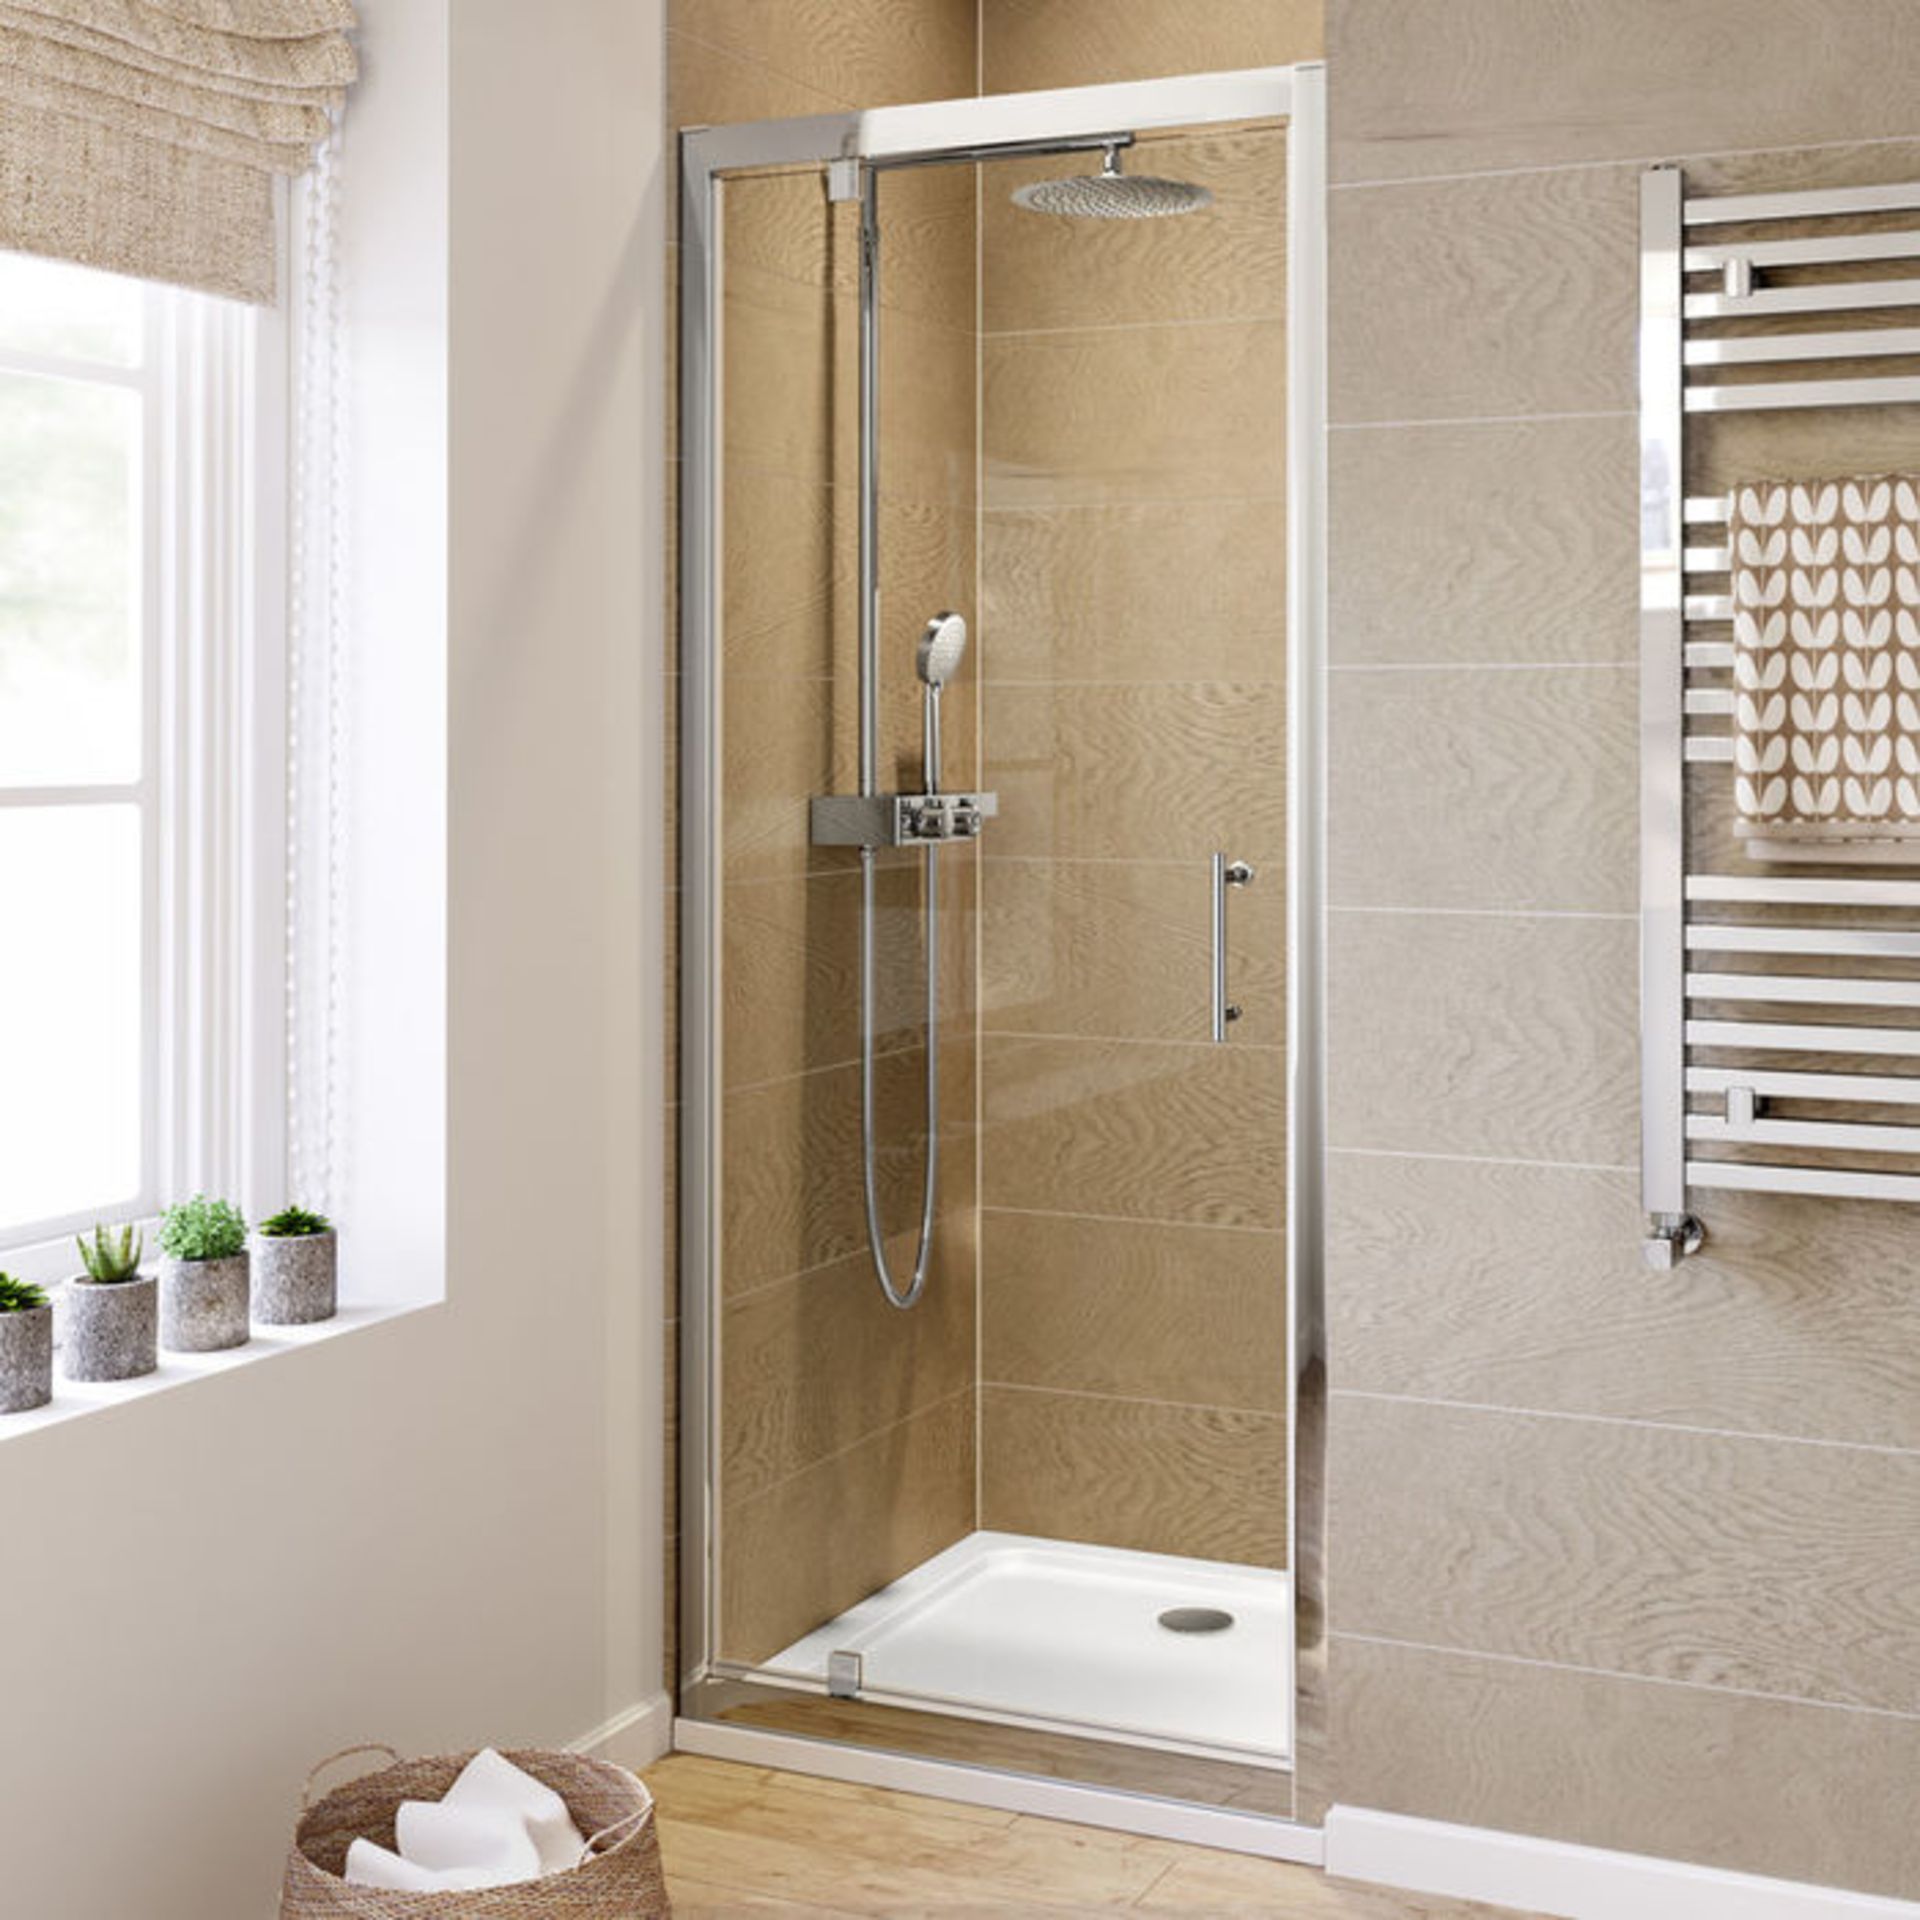 New Twyford's 6mm - Elements Pivot 760mm Shower Door 6mm Safety Glass Fully Waterproof Tested P... - Image 2 of 3